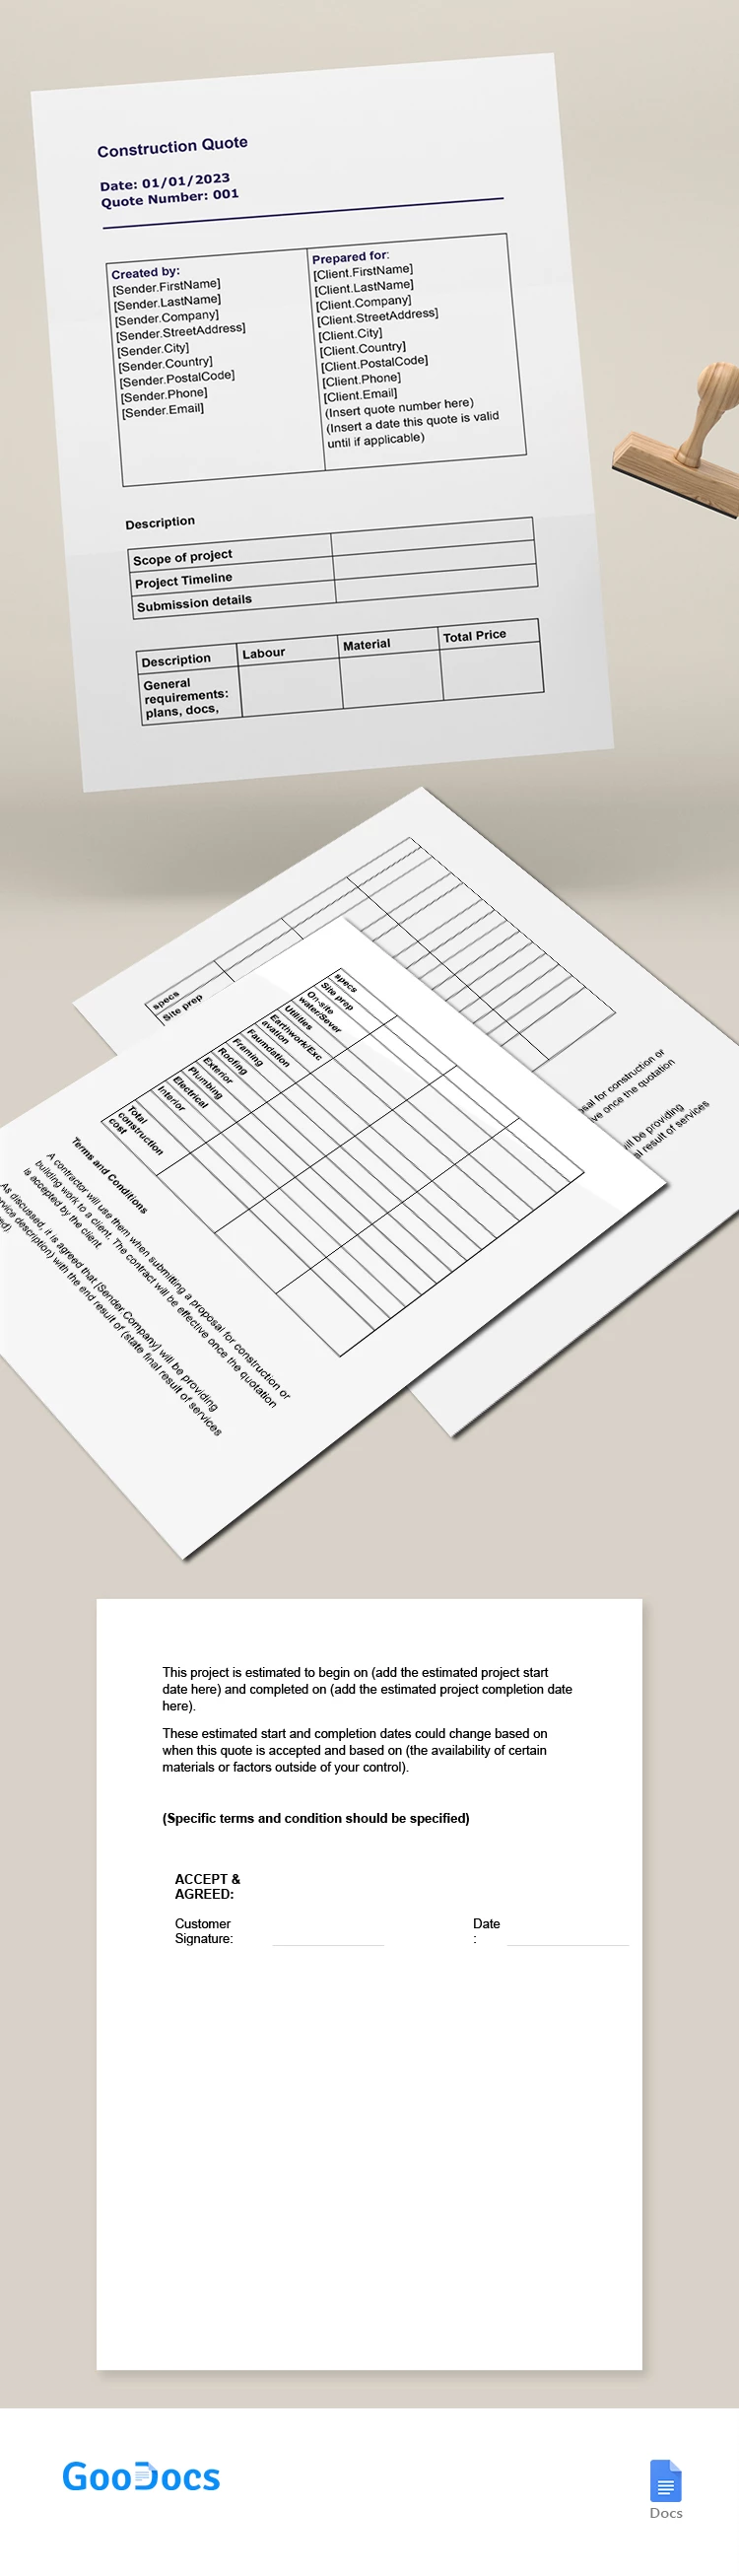 Construction Quote - free Google Docs Template - 10065549